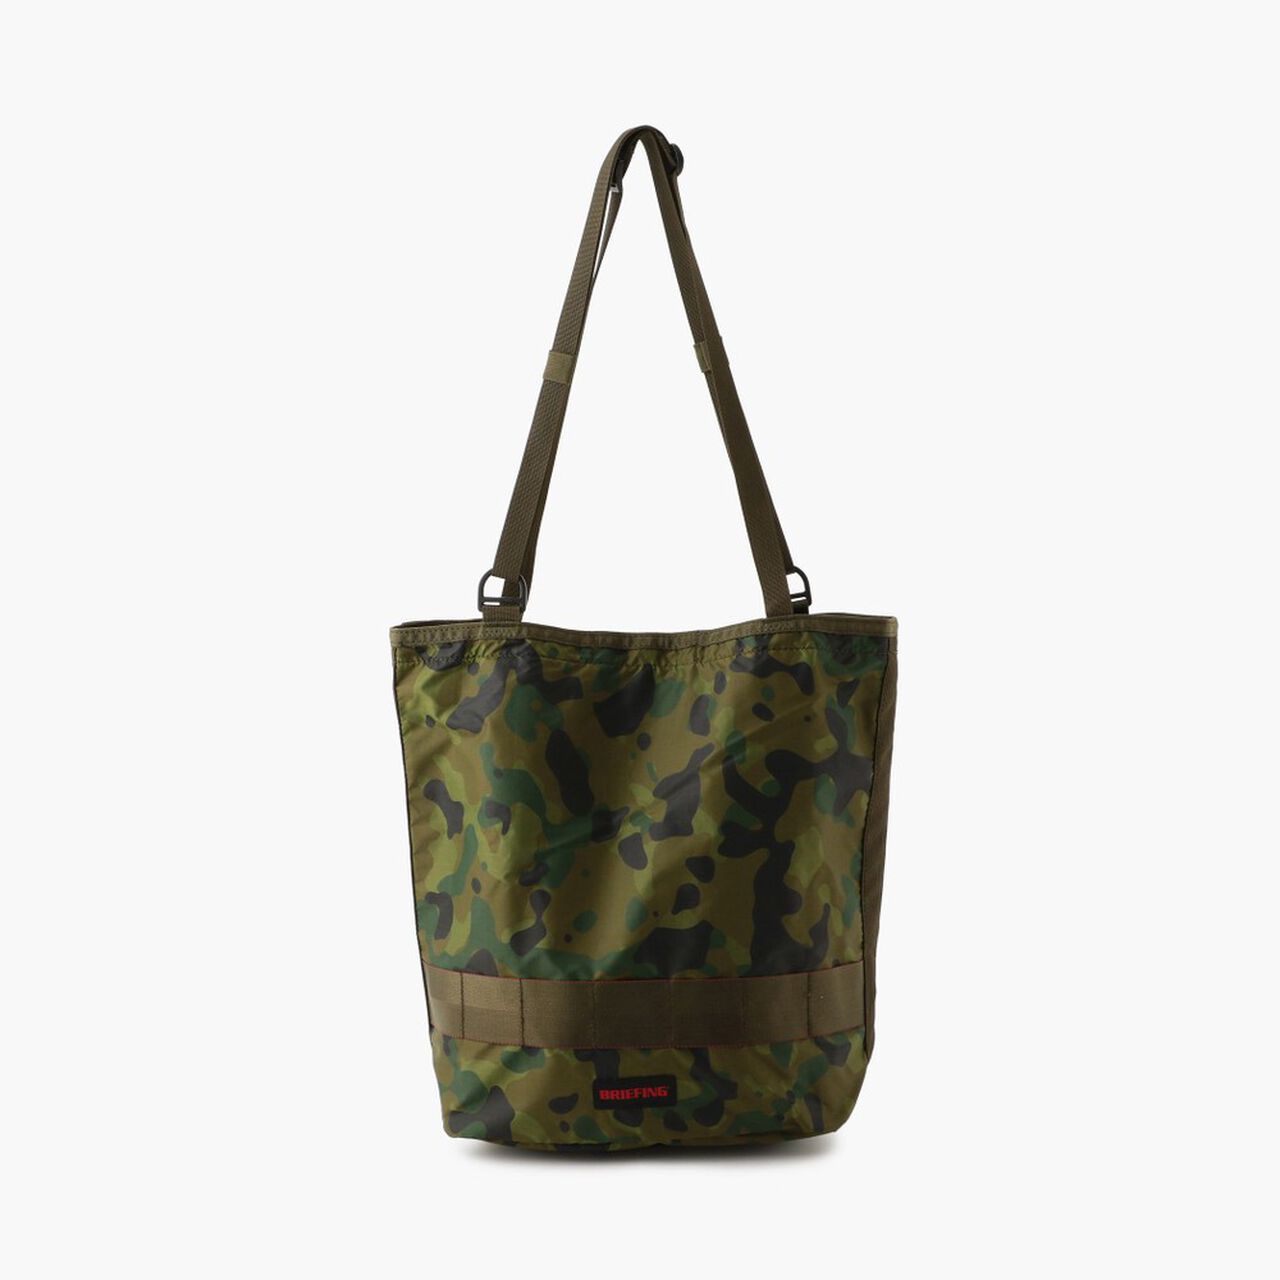 2WAY TOTE SL PACKABLE SM,Tropic Camofl, large image number 0